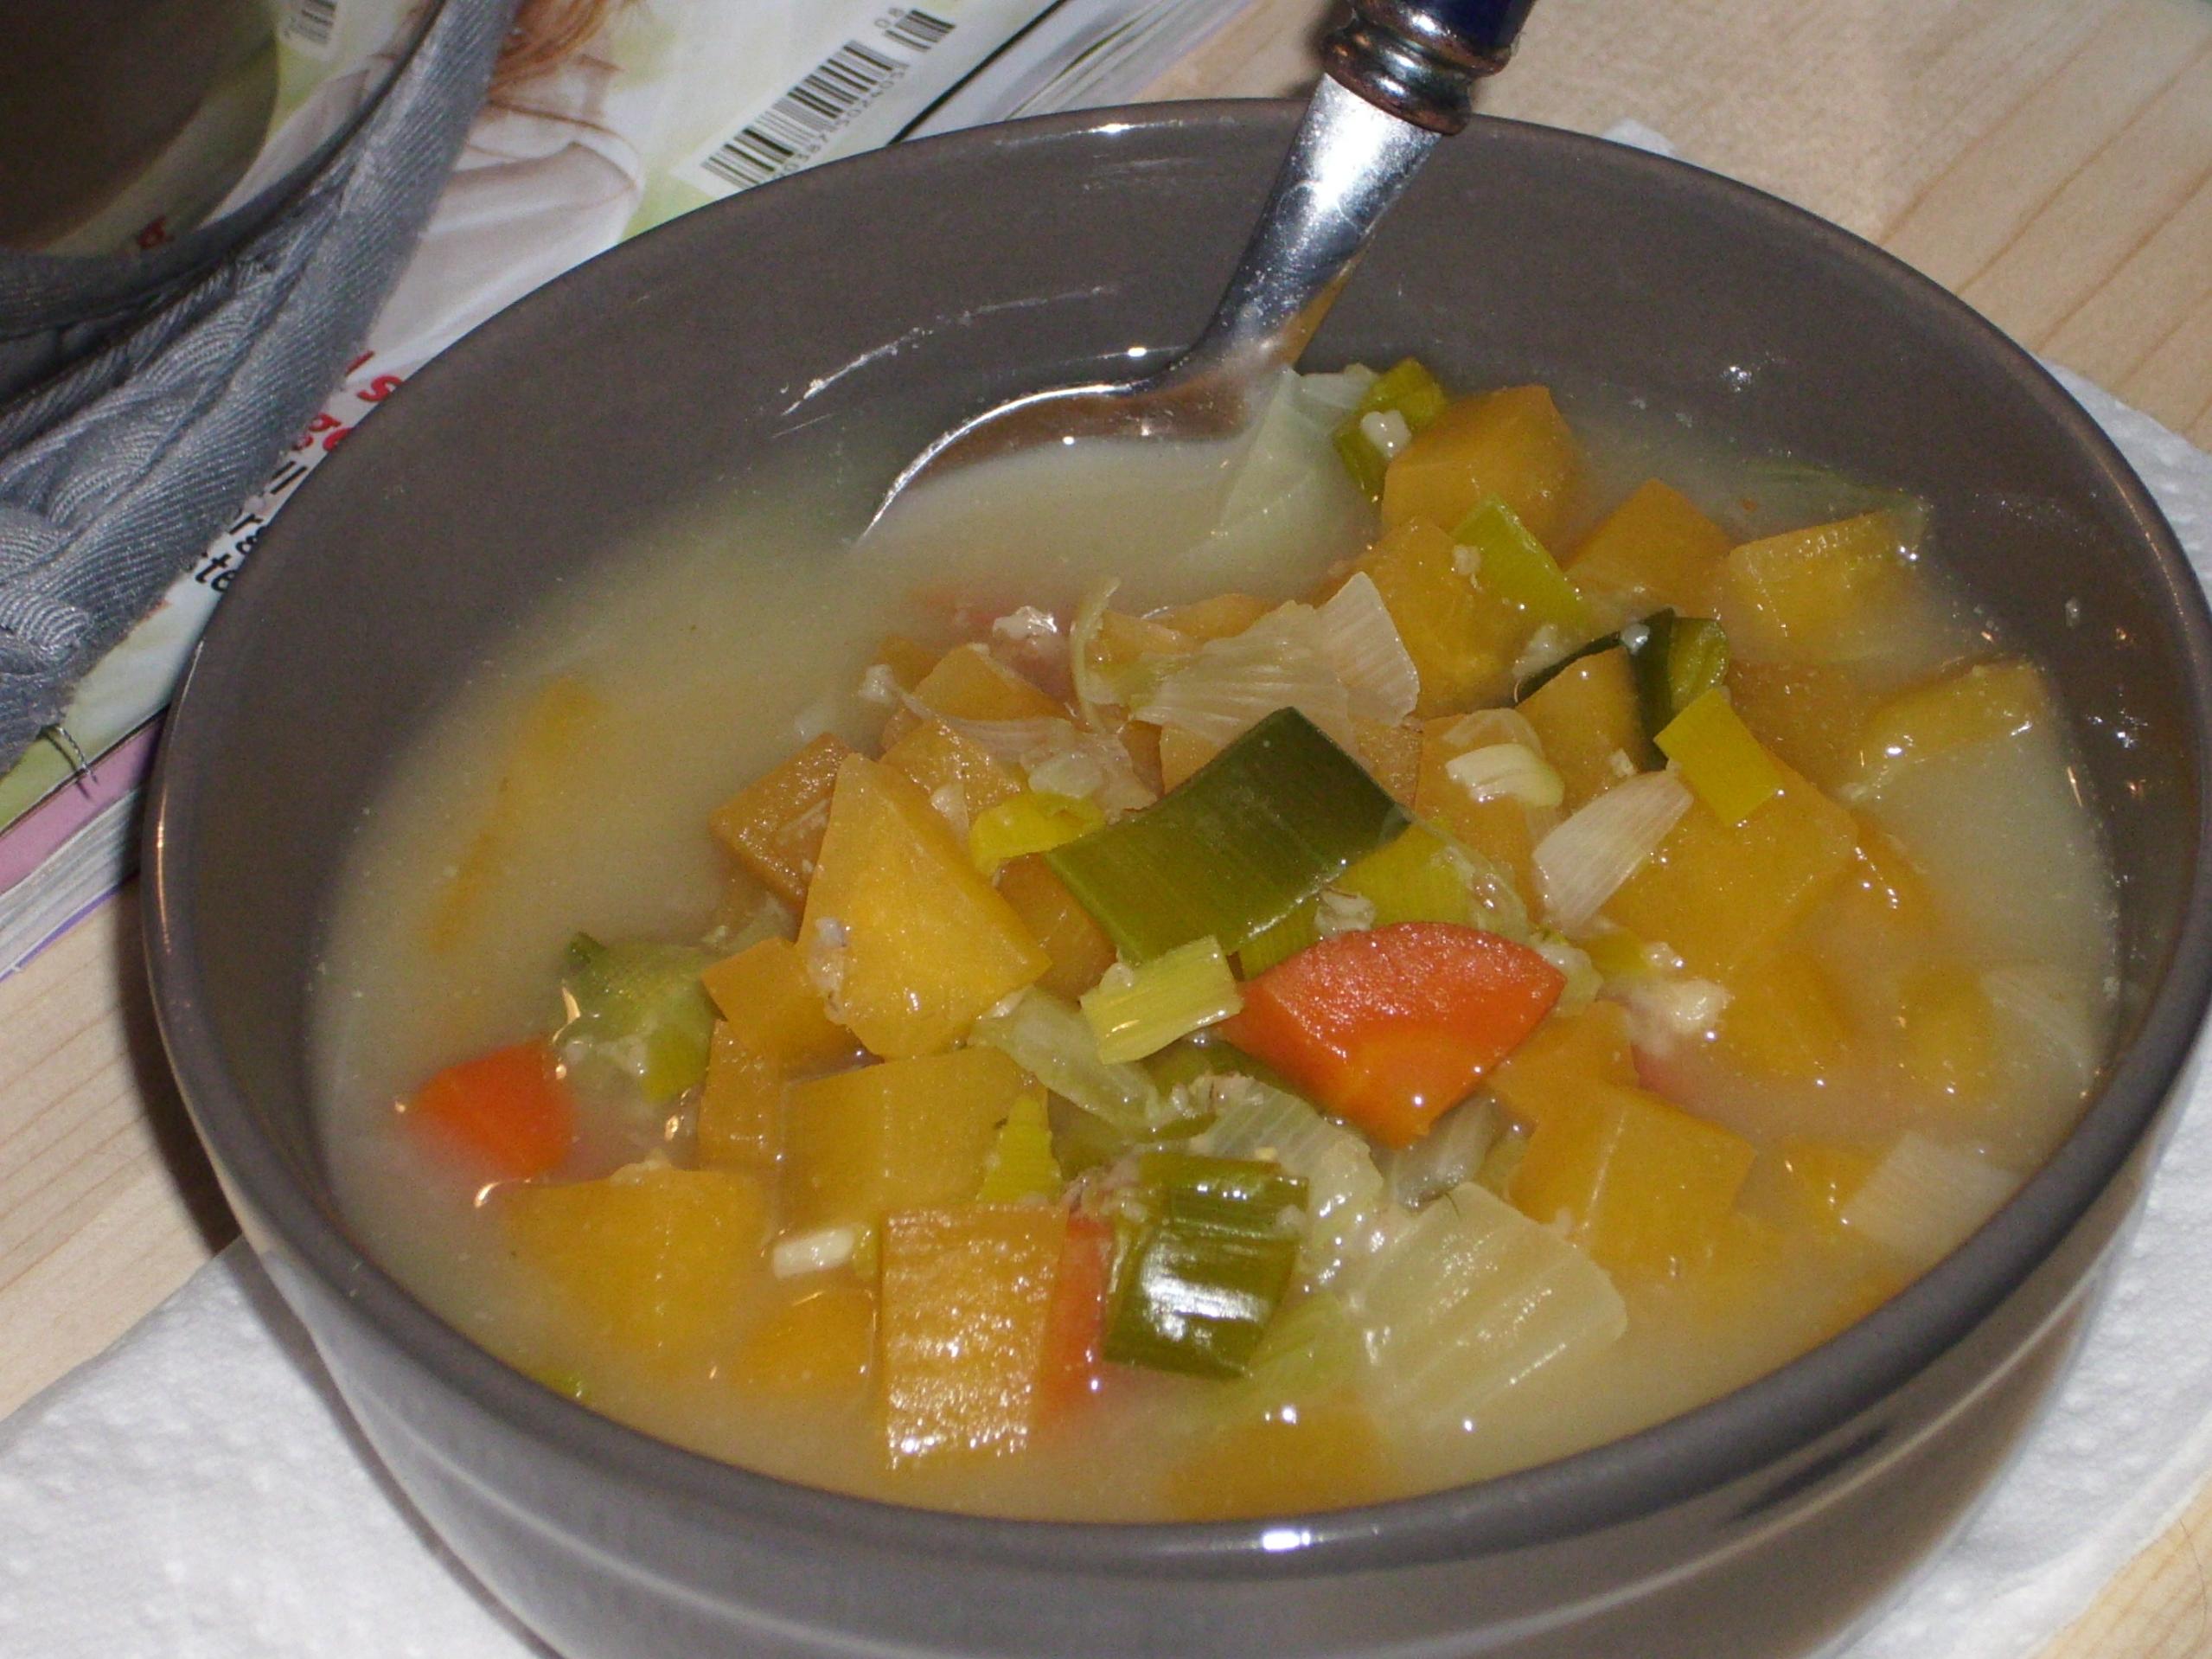  Warm up with a hearty bowl of Scottish Oaty Vegetable Soup!